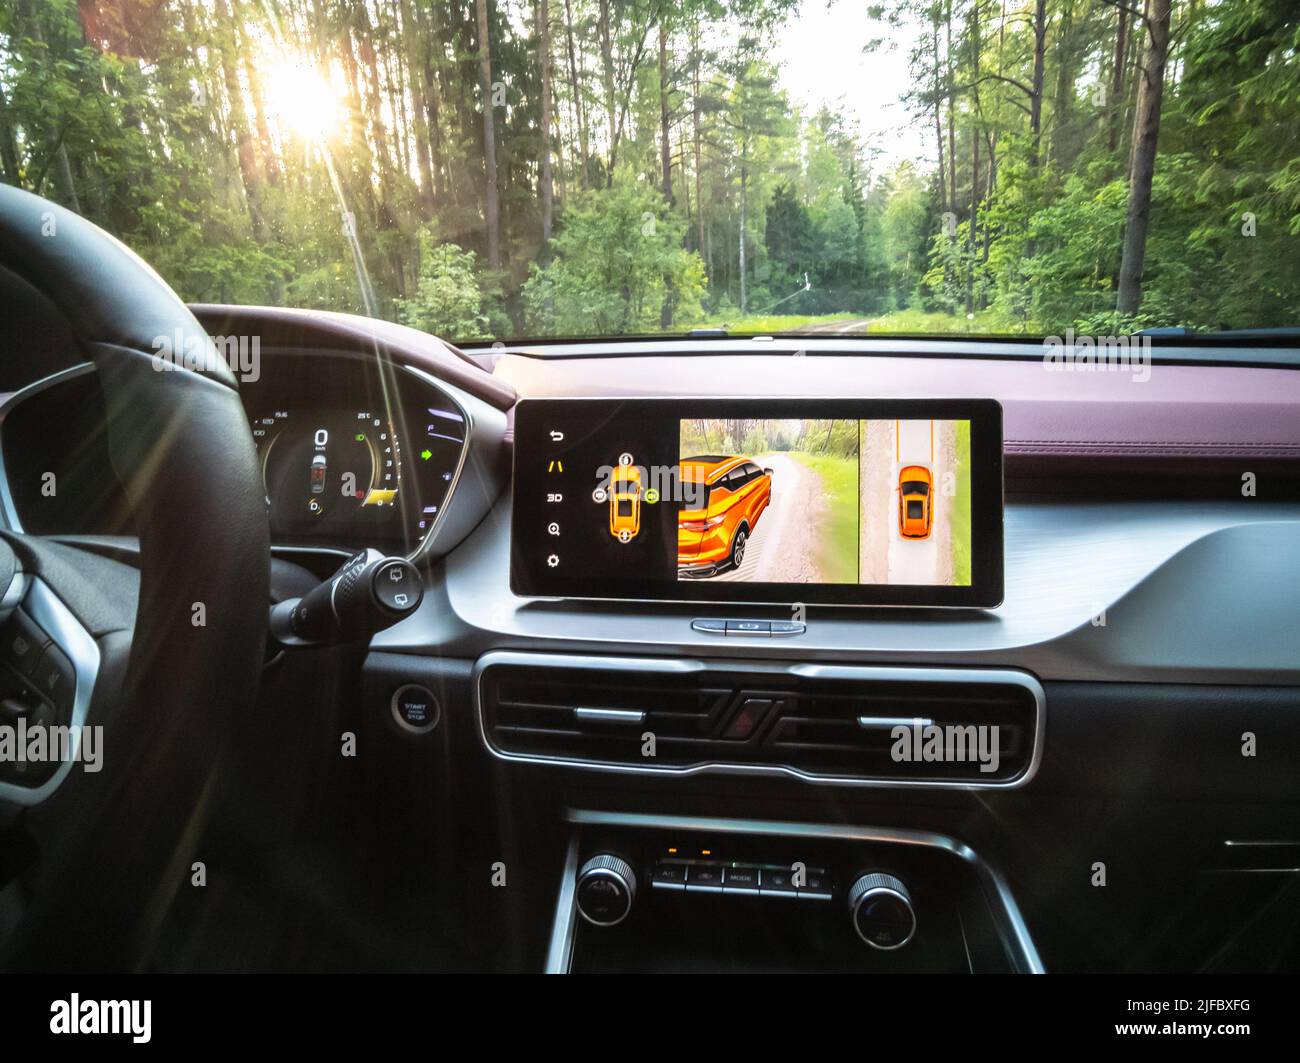 Minsk, Belarus - June 2022: Geely SUV media system screen Geely Coolray car. Stock Photo